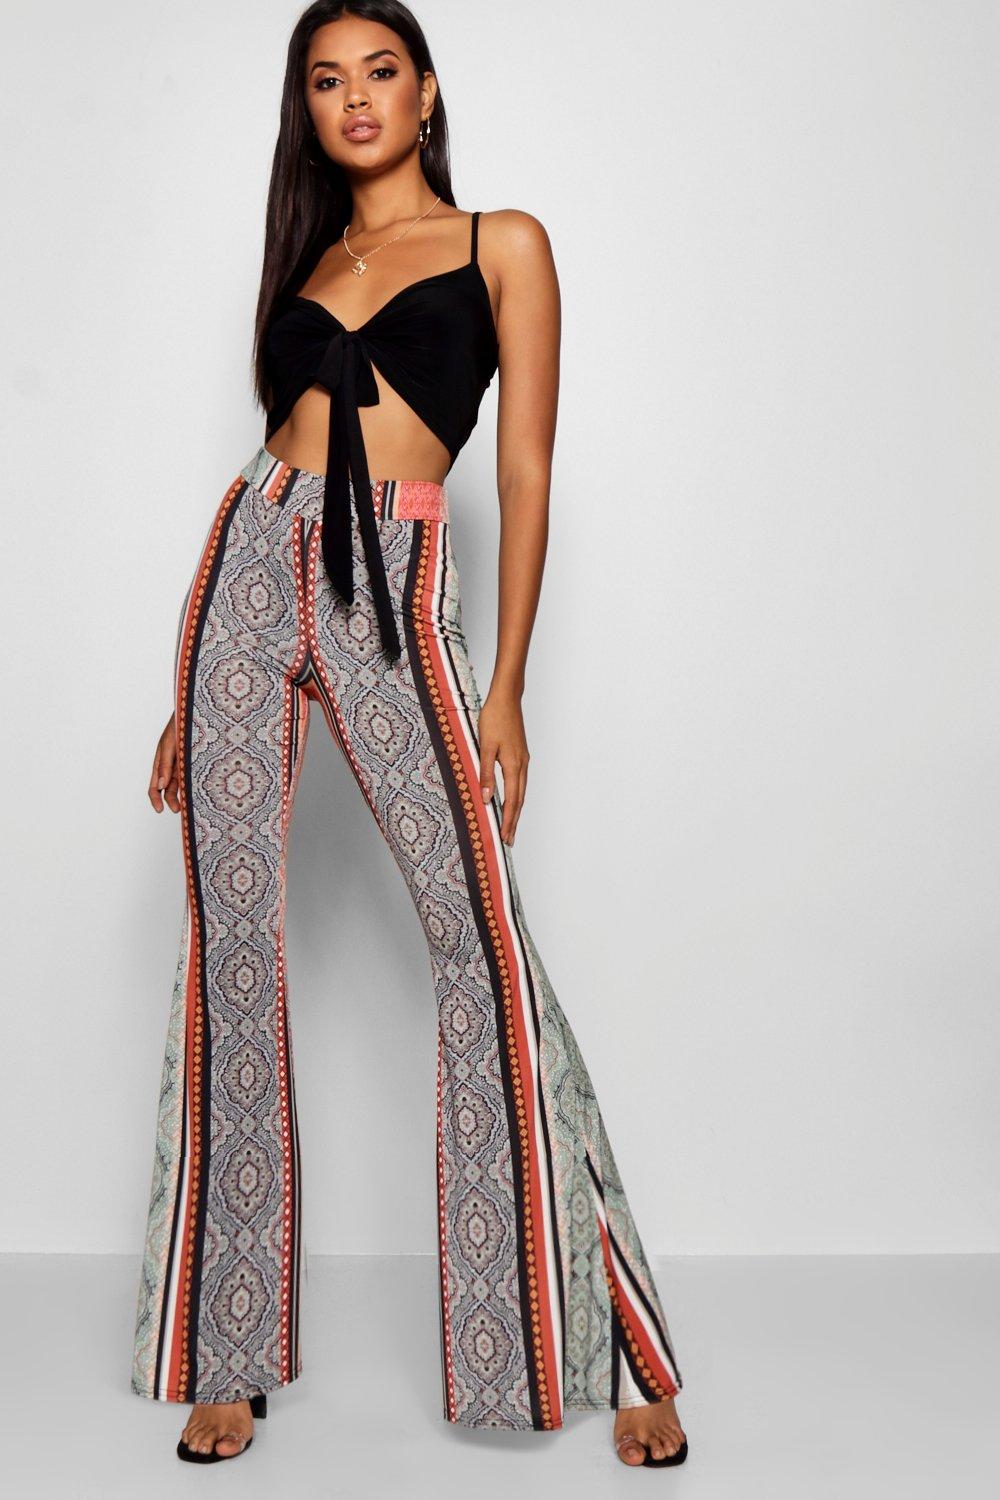 70s style bell bottoms